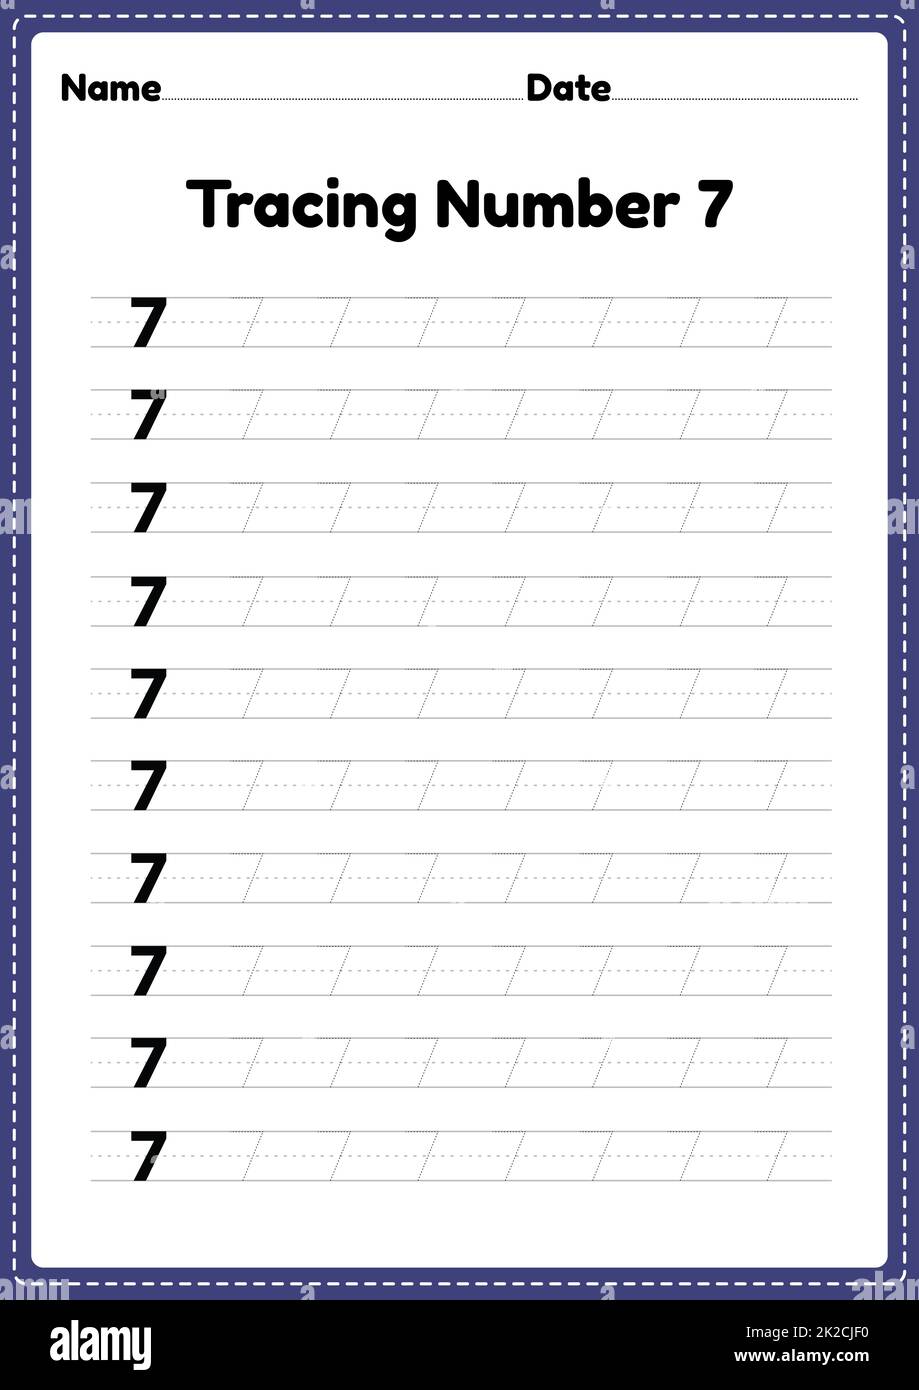 Tracing number 7 worksheet for kindergarten and preschool kids for educational handwriting practice in a printable page. Stock Photo